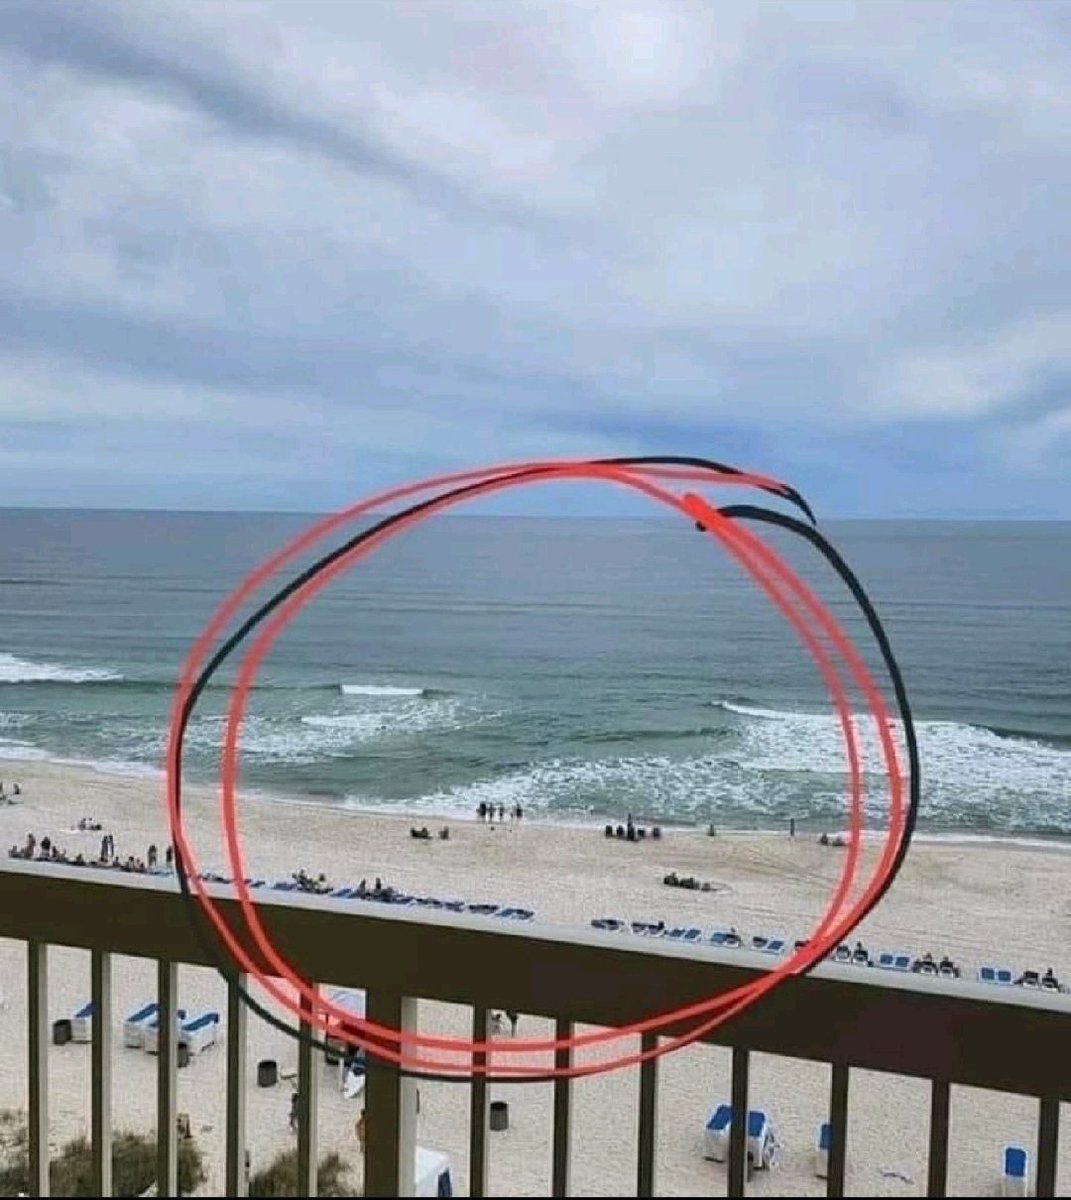 Rip tides are hard to spot and deadly. They’re where there are few waves. Don’t get fooled, they can pull you away. Stay alert and swim safe. #BeachSafety #SummerTips #RipCurrents #WaterSafety #Lifeguard